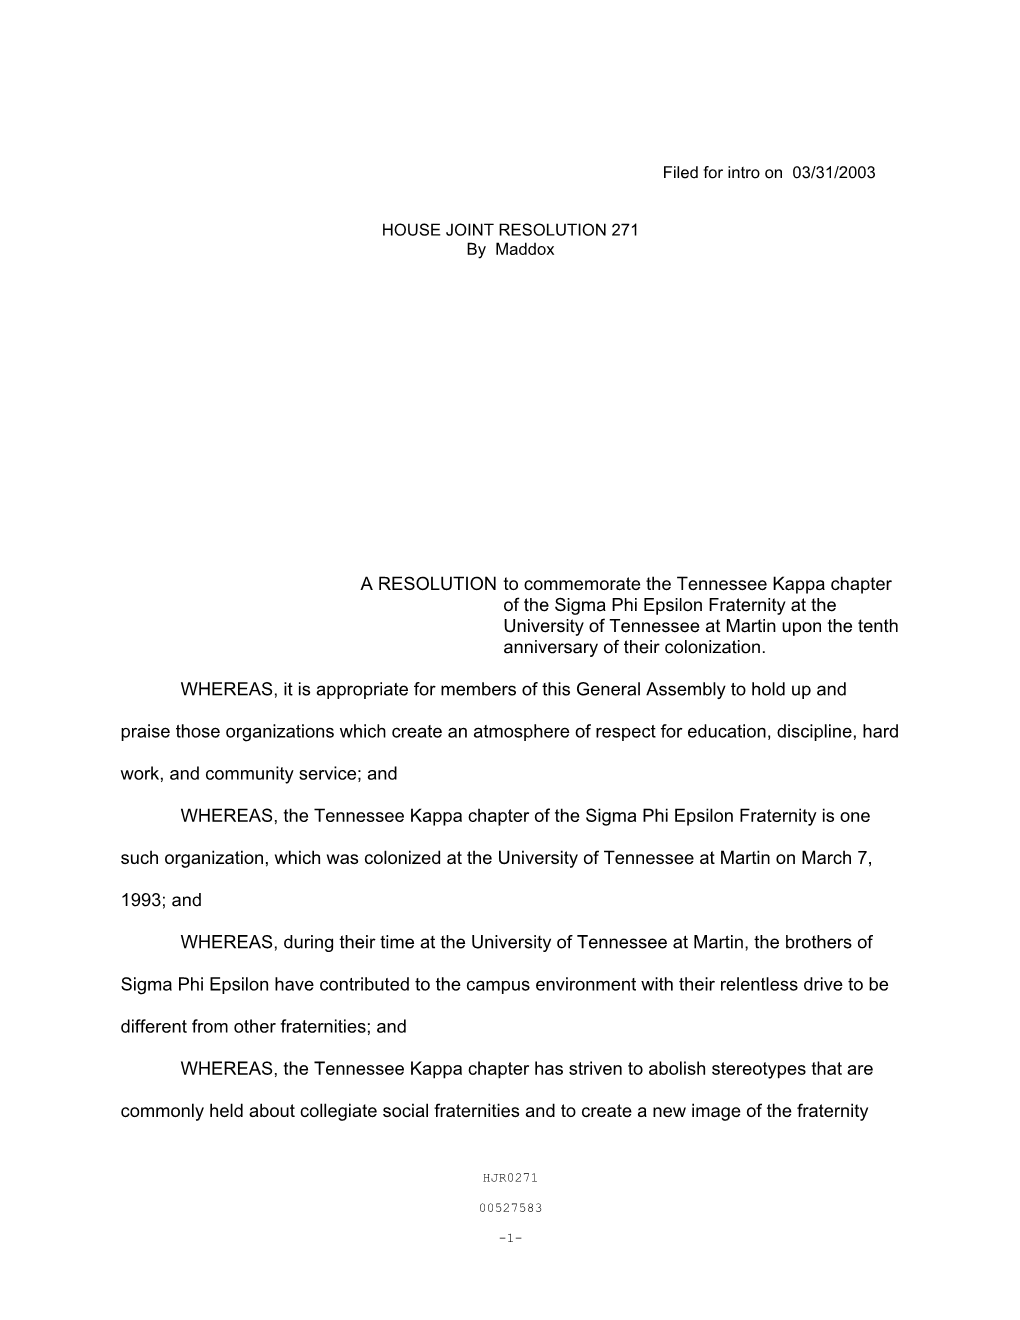 A RESOLUTION to Commemorate the Tennessee Kappa Chapter of The